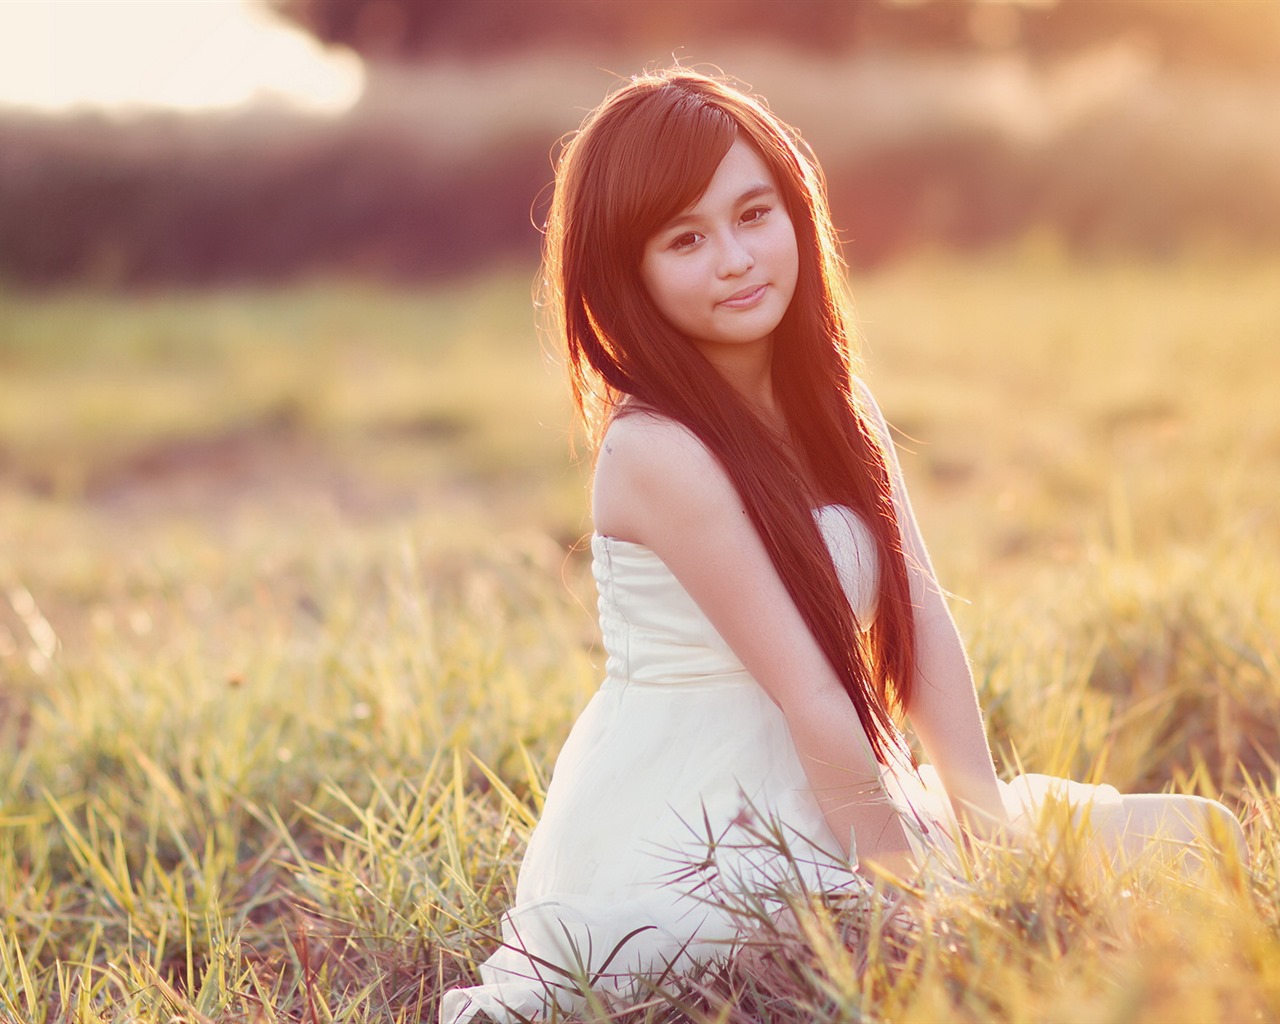 Pure and lovely young Asian girl HD wallpapers collection (5) #29 - 1280x1024